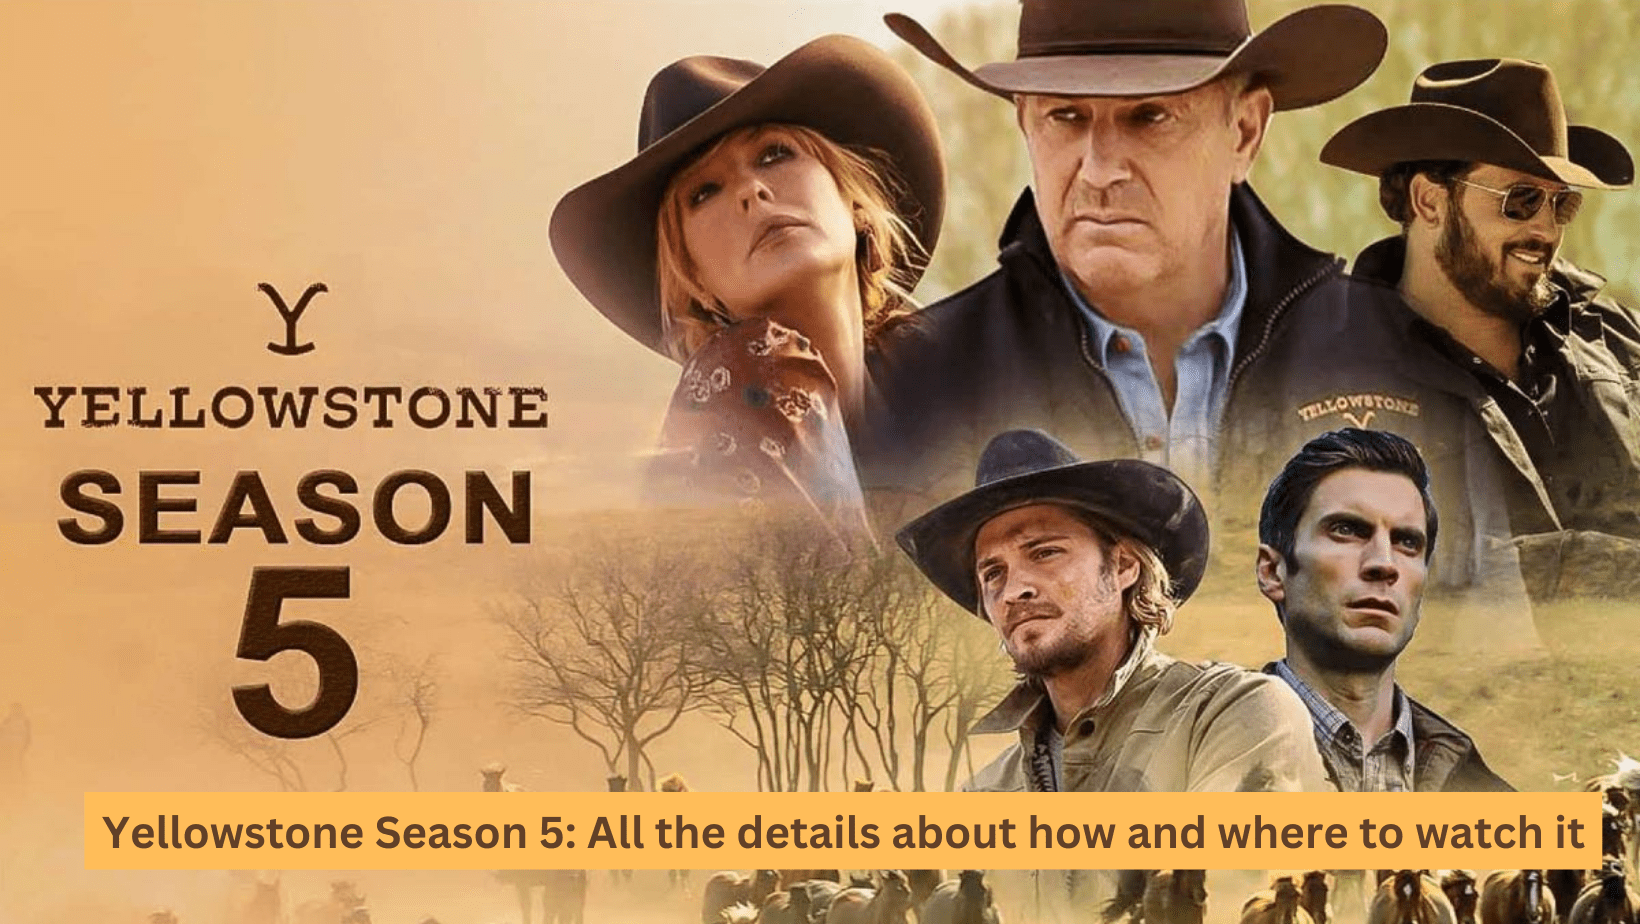 All the details about Yellowstone Season 5